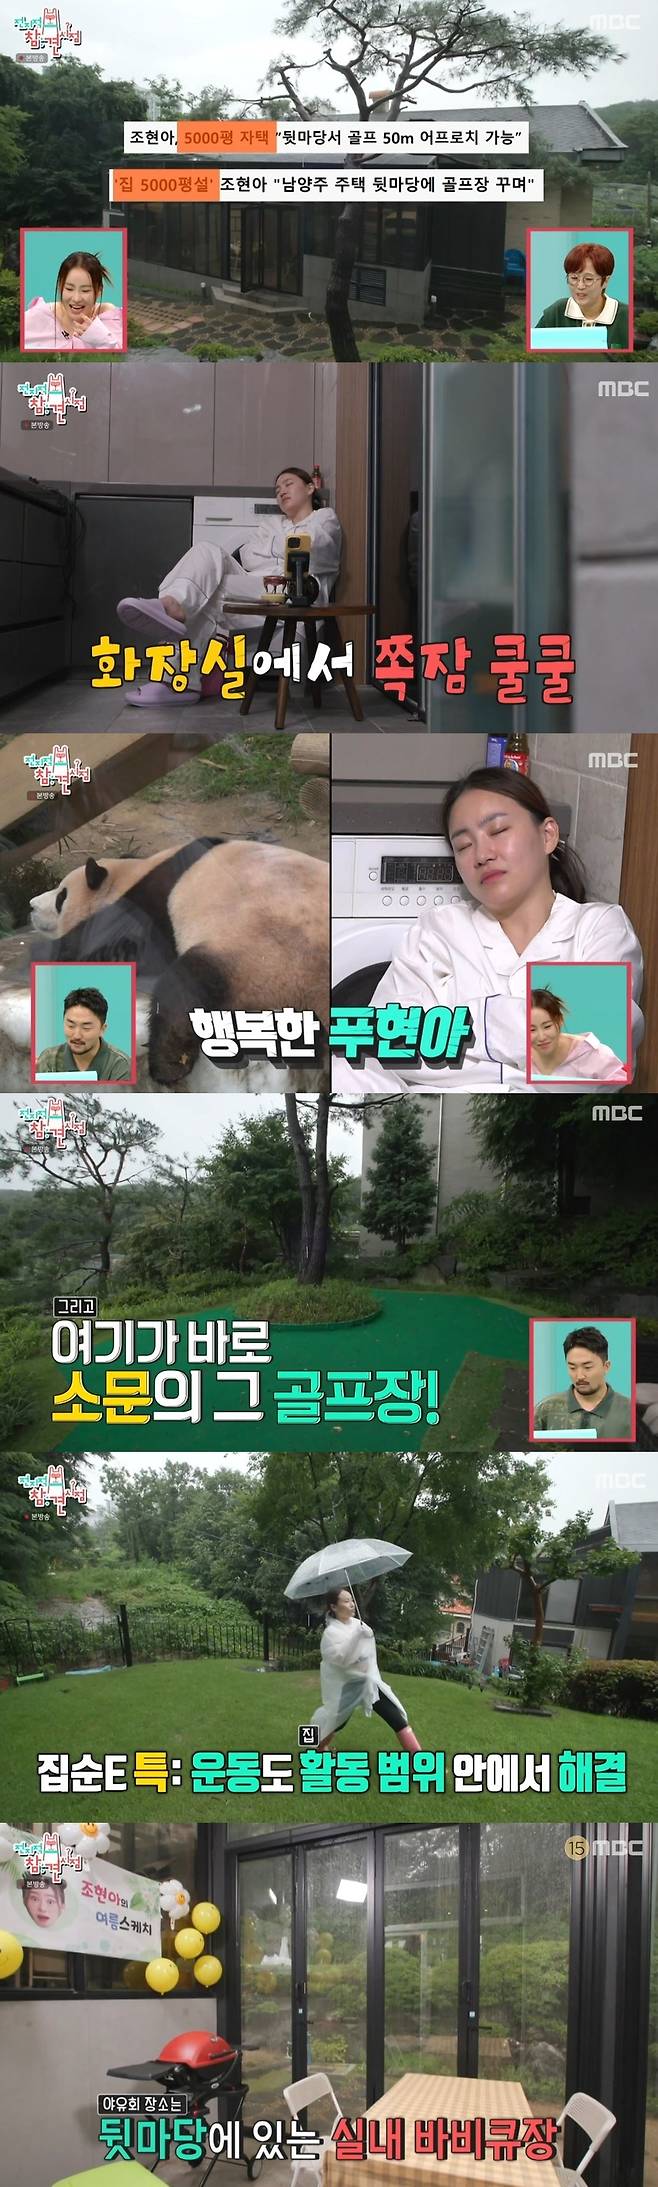 Point of Omniscient Interfere Jo Hyun Ah has unveiled a 5,000-pyeong home.On August 12, MBC  ⁇ Point Point of Omniscient Interfere  (hereinafter referred to as Point of Omniscient Interfere), Jo Hyun Ah appeared as a guest.On the same day, Jo Hyun Ahs manager said, Its an extreme E, but its a homebody. I havent seen a homebody in 10 years, but I want to see it, so Im reporting it.Jo Hyun Ah drew attention by constantly moving and doing various things in the third floor home. The second floor was used by the family, and the third floor was Jo Hyun Ahs space. There was a sofa space on one side of the bedroom.On one side of the living room, there was a workshop and a shooting space for Jo Hyun Ahs Thursday night.As soon as Jo Hyun Ah woke up, he rolled a massage ball and made a video call with Tiara Hyomin. When he was cleansing, he did not miss each pore, saying, I do not go to dermatology.In the living room, he also had time to play the piano, work on music, and read books. In particular, the bathroom was his azit, and Jo Hyun Ah laughed as he danced, drank, watched Infinite Challenge and slept.Yoo Byung-jae, who was watching the video while suddenly falling asleep in the bathroom, added a smile by saying, Its not much different from Fu Bao so far. Sleeping all of a sudden.Jo Hyun Ahs busy steps continued in Madang. Home, which was said to be 5,000 pyeong in a joke, was revealed as a steamer. At that time, Jo Hyun Ah reported through the SNS that Where did it go wrong ... Anyway, I corrected it !!!! Although not up to 5,000 pyeong, Jo Hyun Ahs Home attracted attention to the golf course, the spacious Madang where you can groove, and the space where McDonalds Barbeque Sauce can be enjoyed.